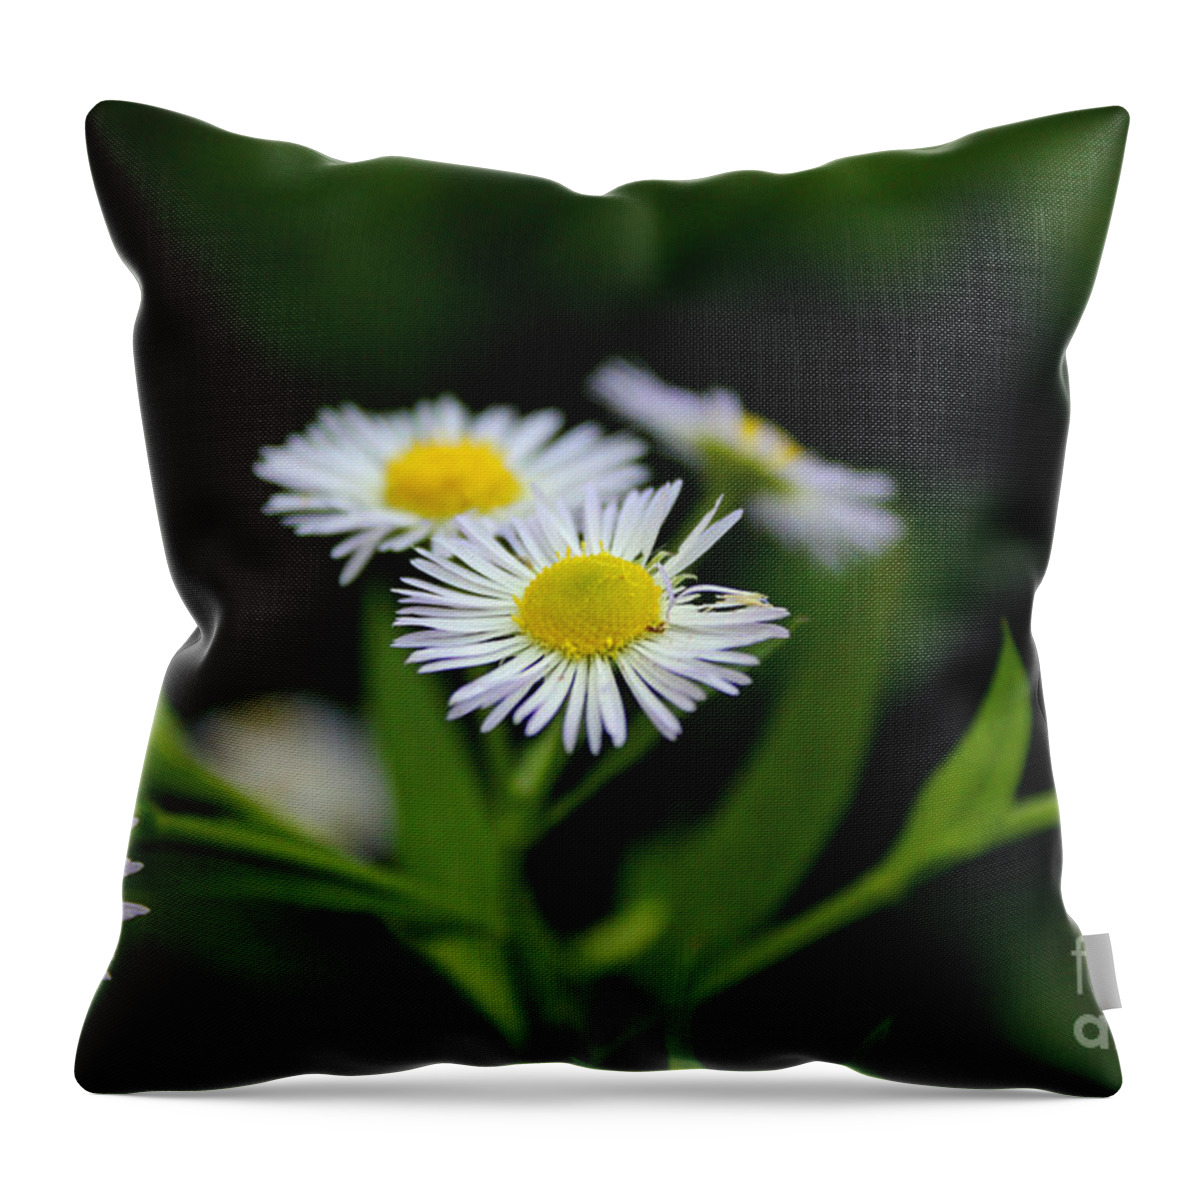 Daisy Throw Pillow featuring the photograph Late Summer Bloom by Melissa Petrey